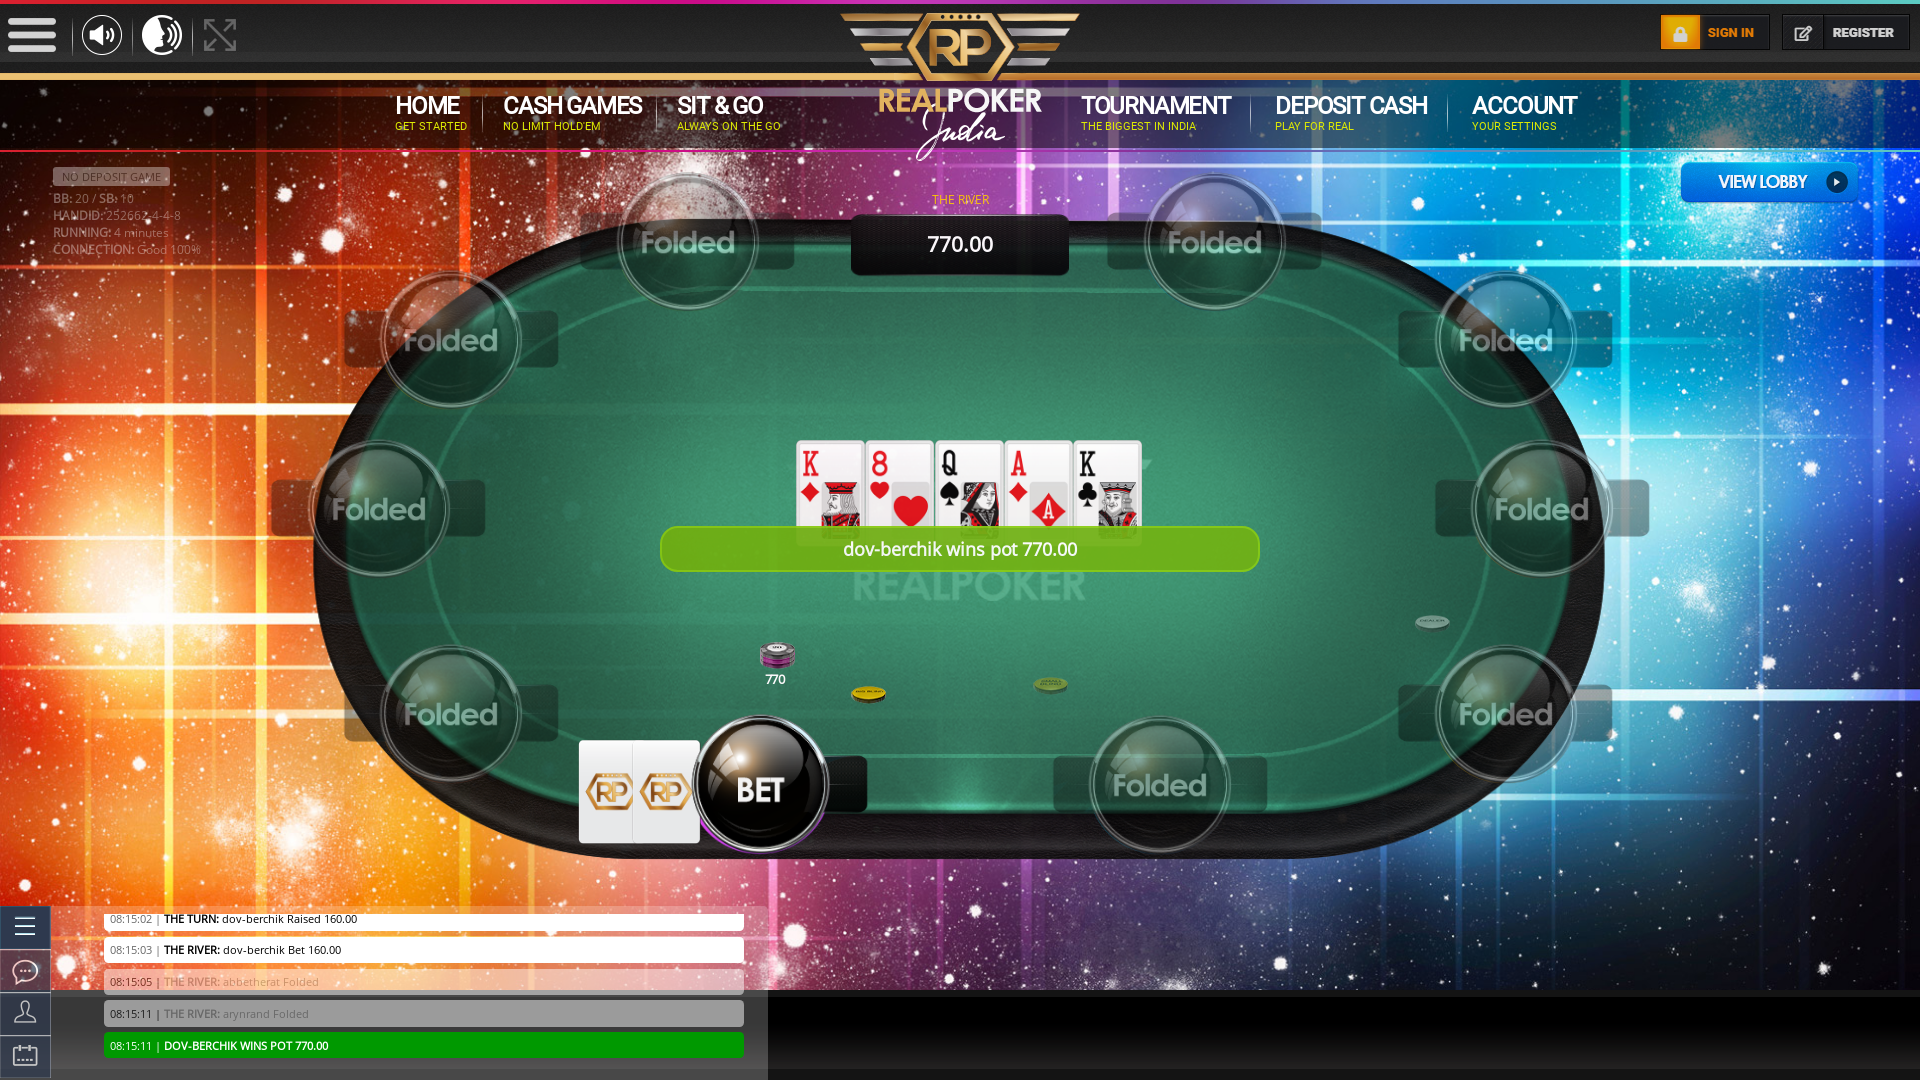 10 player texas holdem table at real poker with the table id 252662